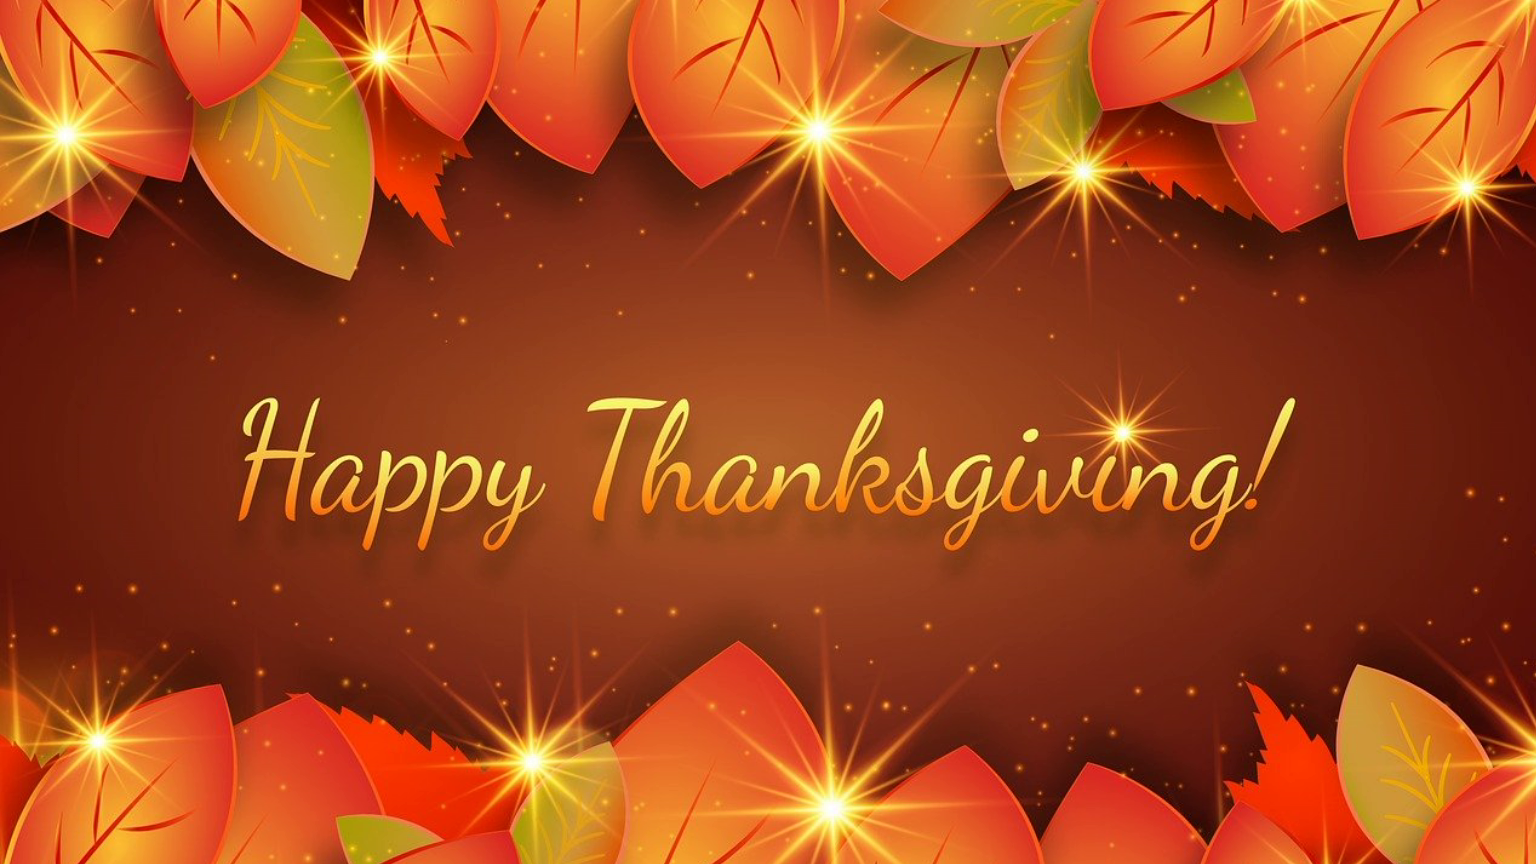 20 Thanksgiving Zoom Backgrounds For A Virtual Gathering | Images and ...